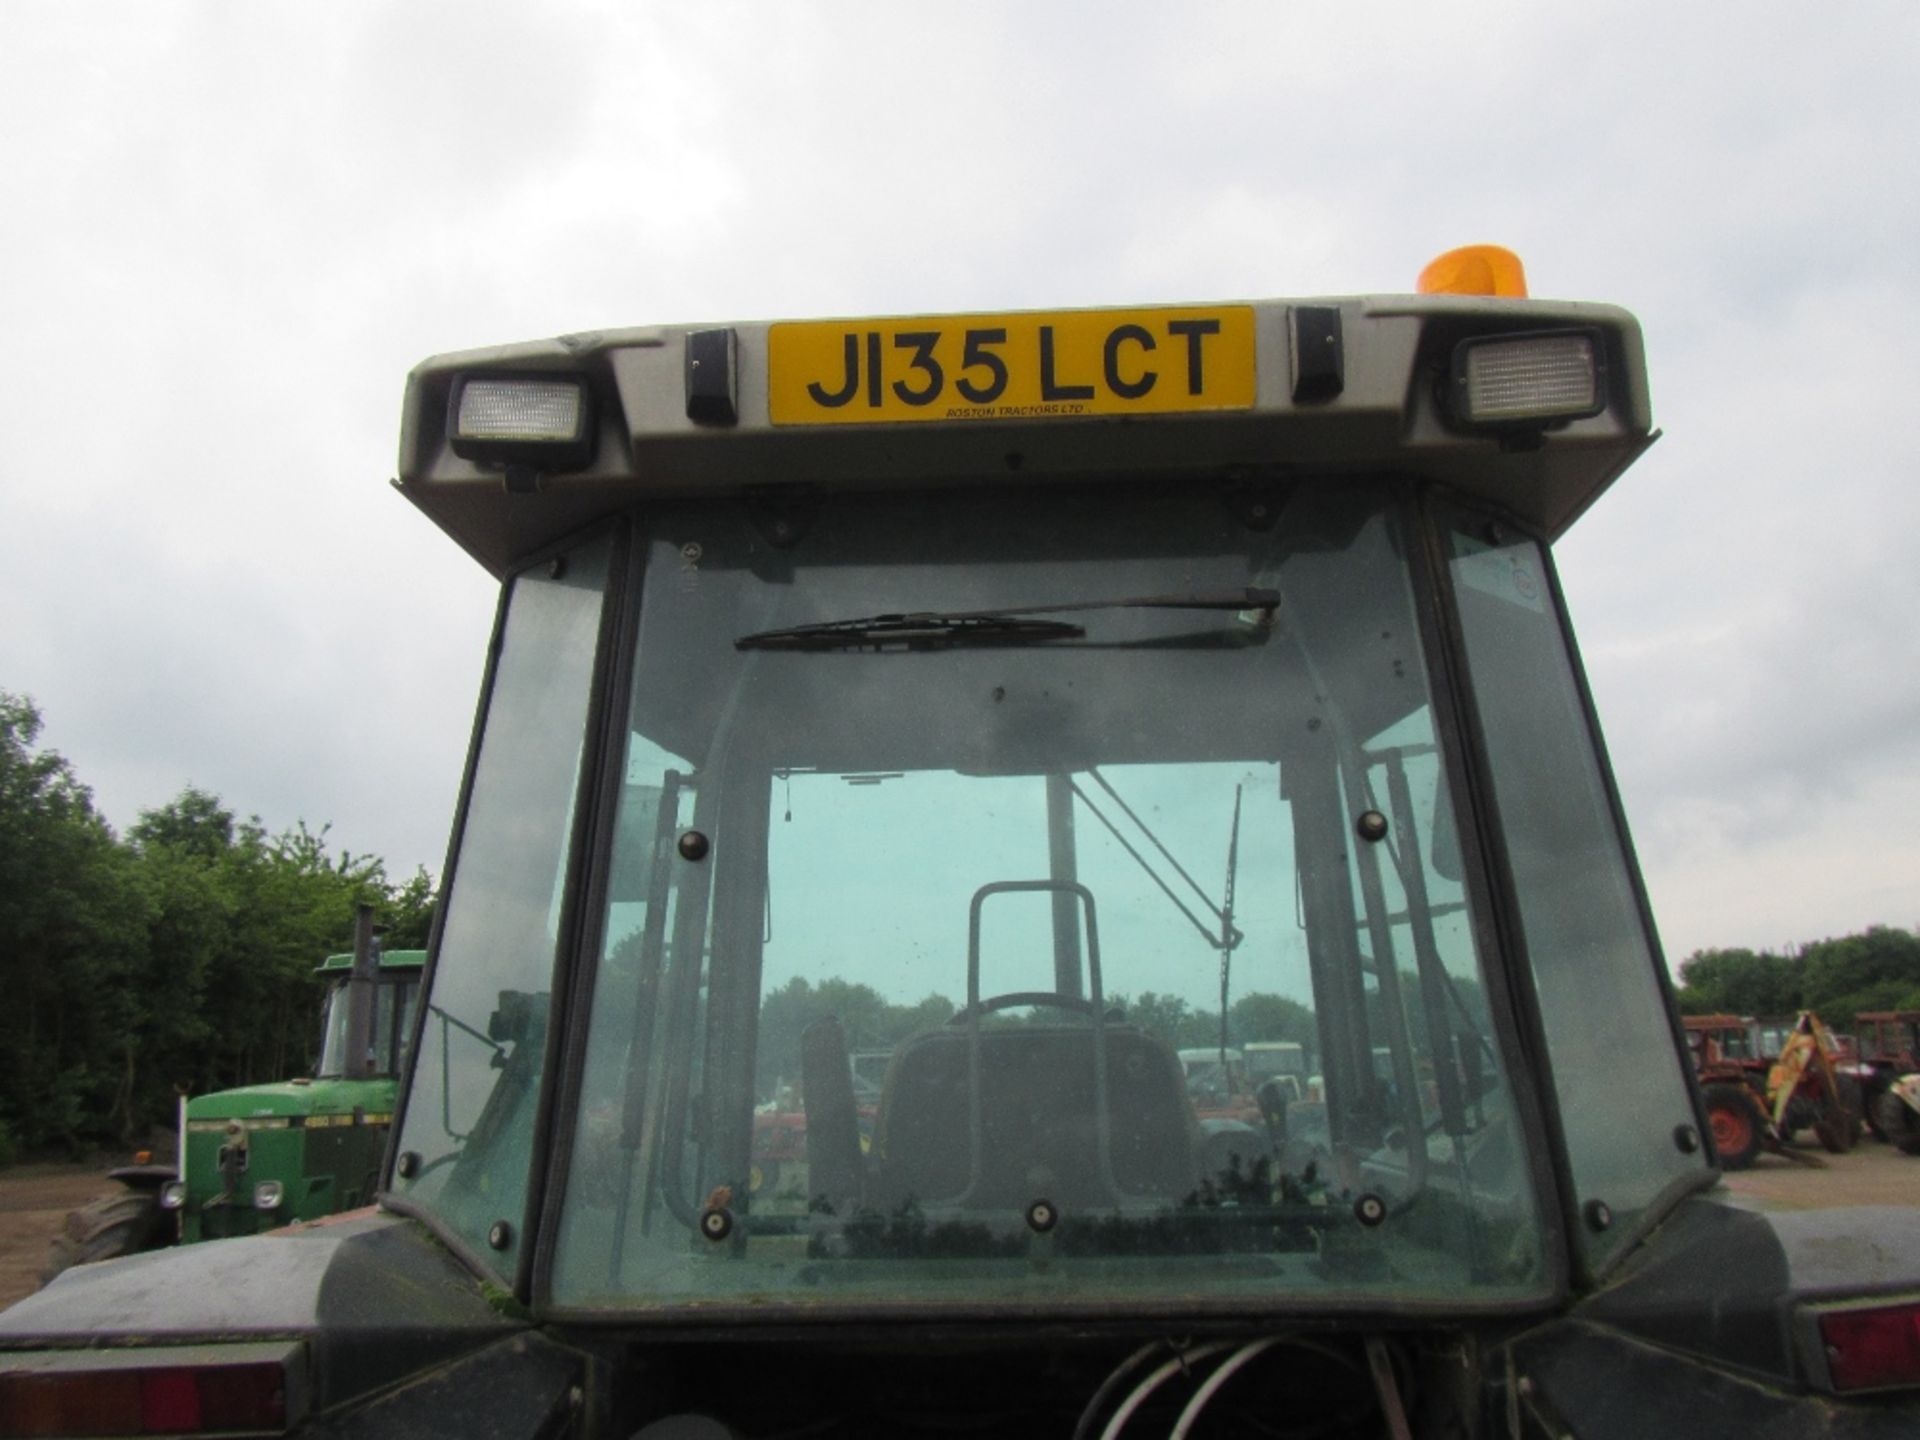 Massey Ferguson 3070 4x4 Tractor with Loader Reg No J135 LCT Ser No S080035 - Image 8 of 16